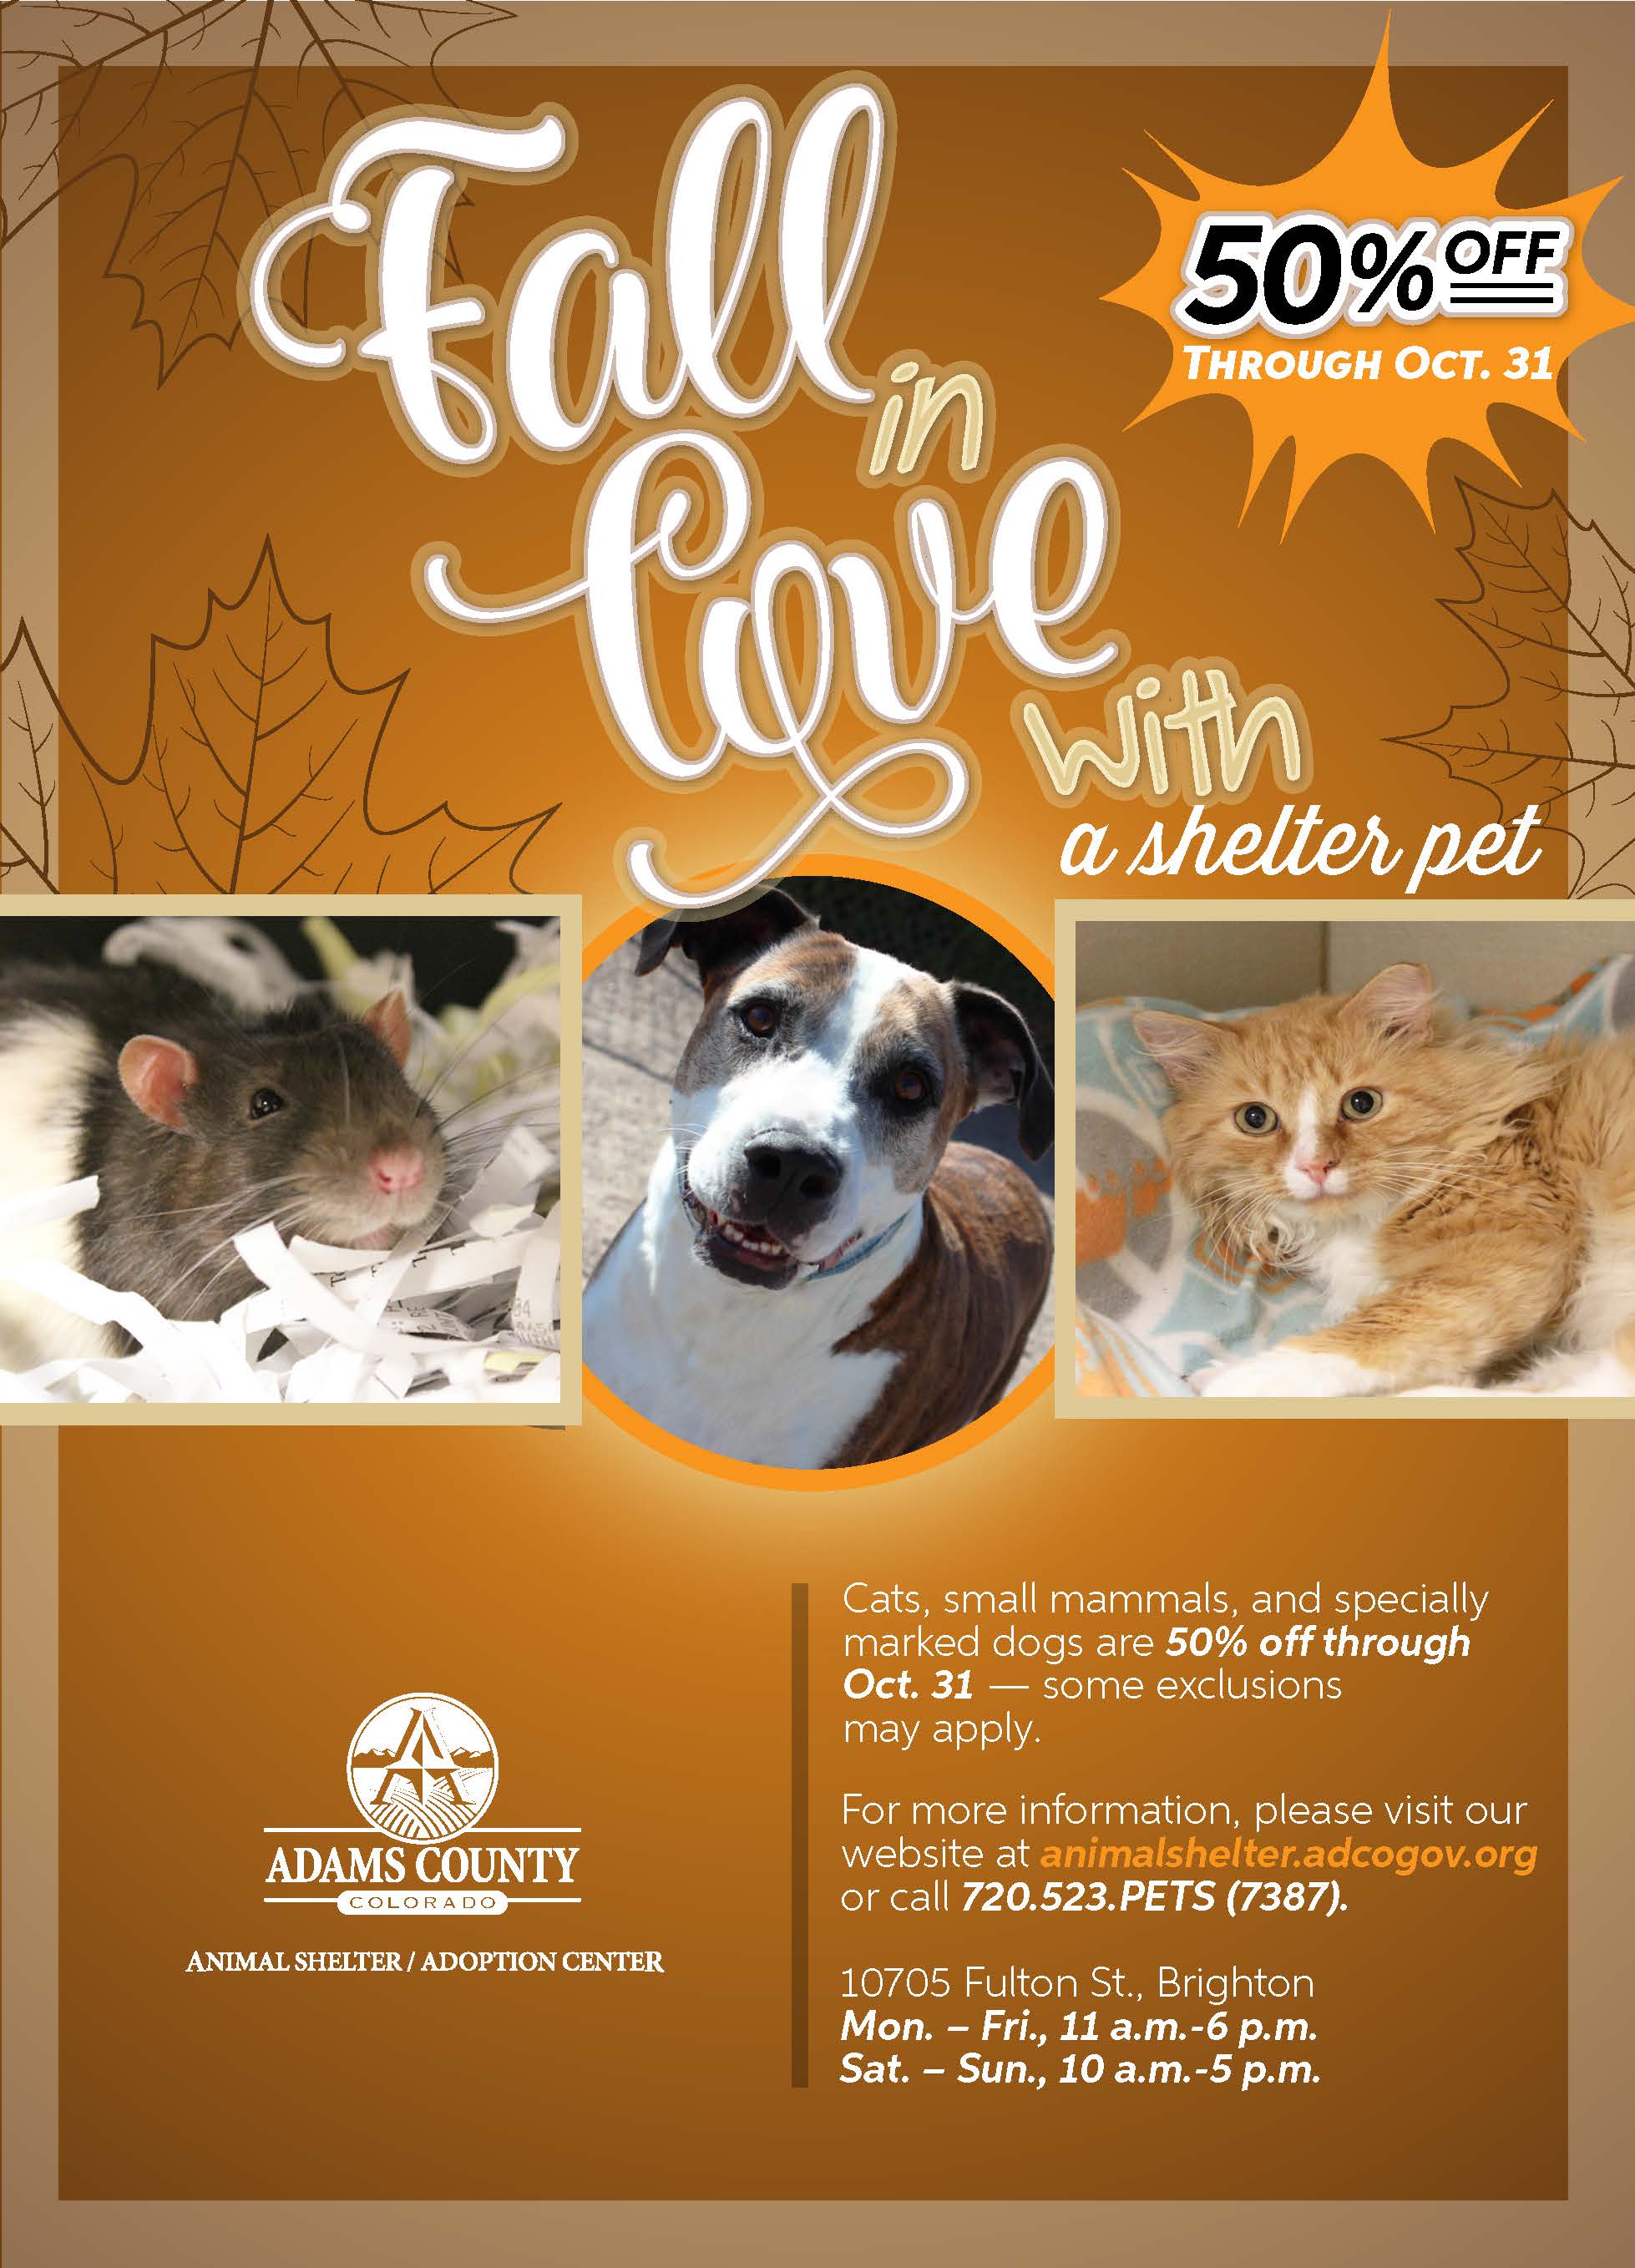 Fall in Love with a Shelter Pet